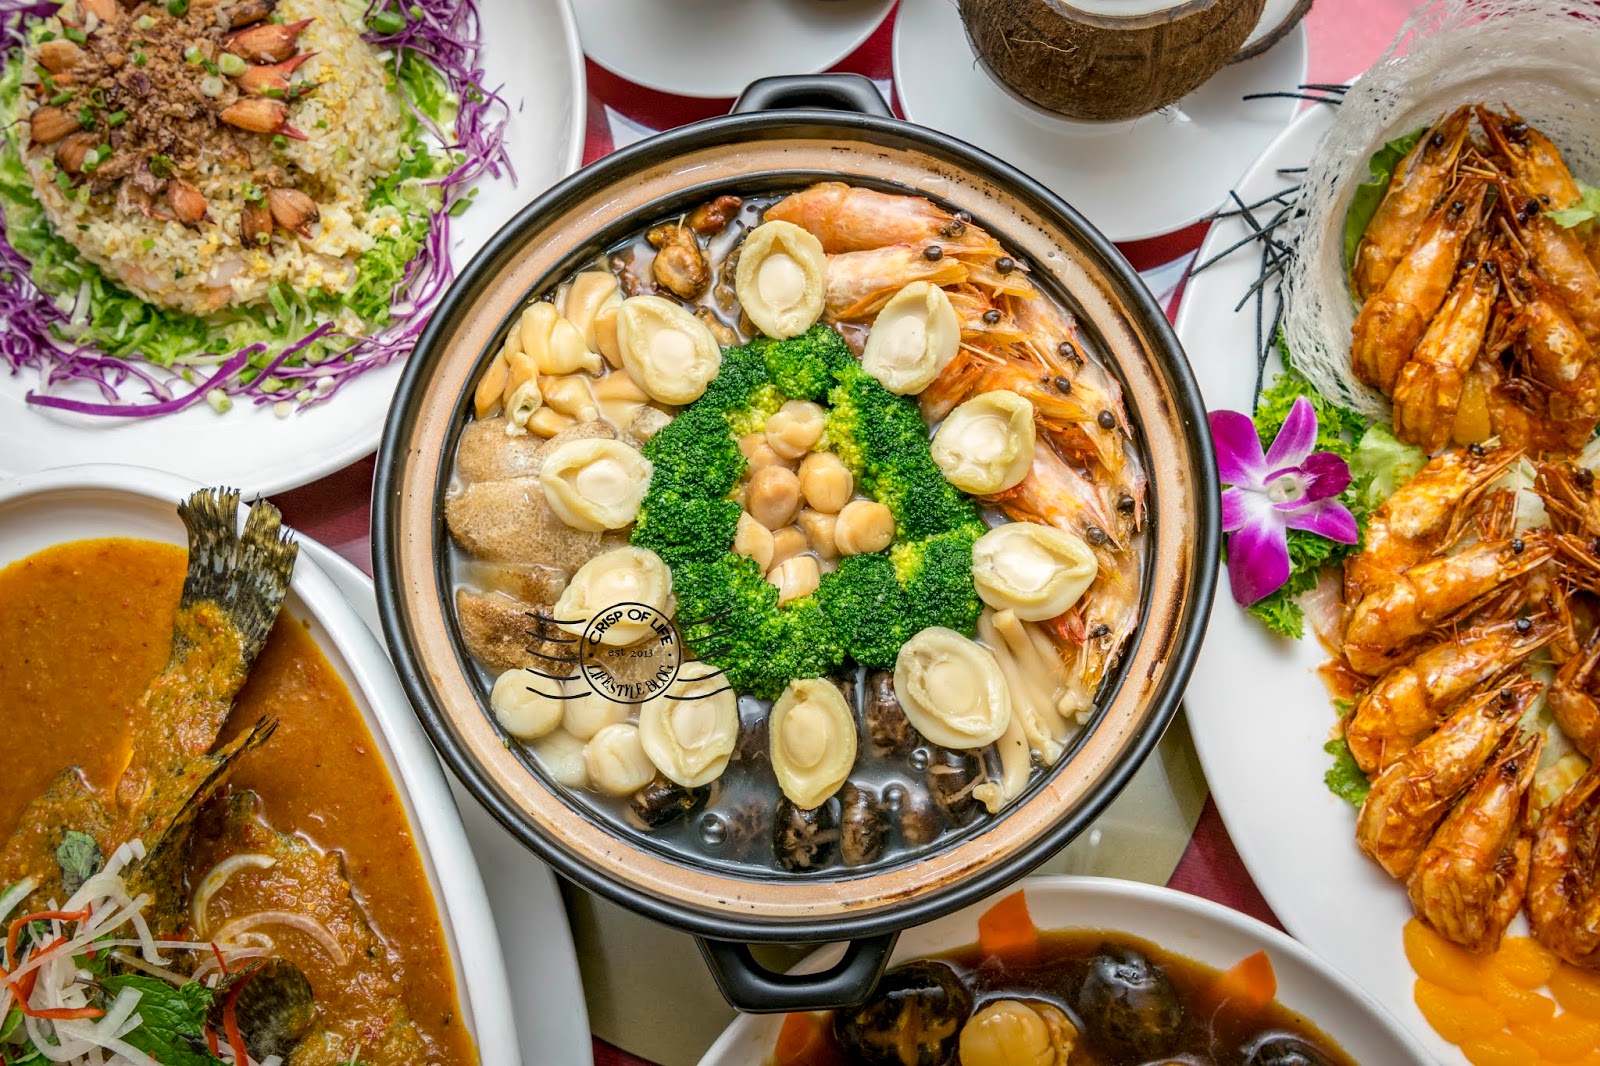 Luxury Feast of Poon Choi and Buffet in Chinese New Year 2020 @ Iconic Hotel, Penang